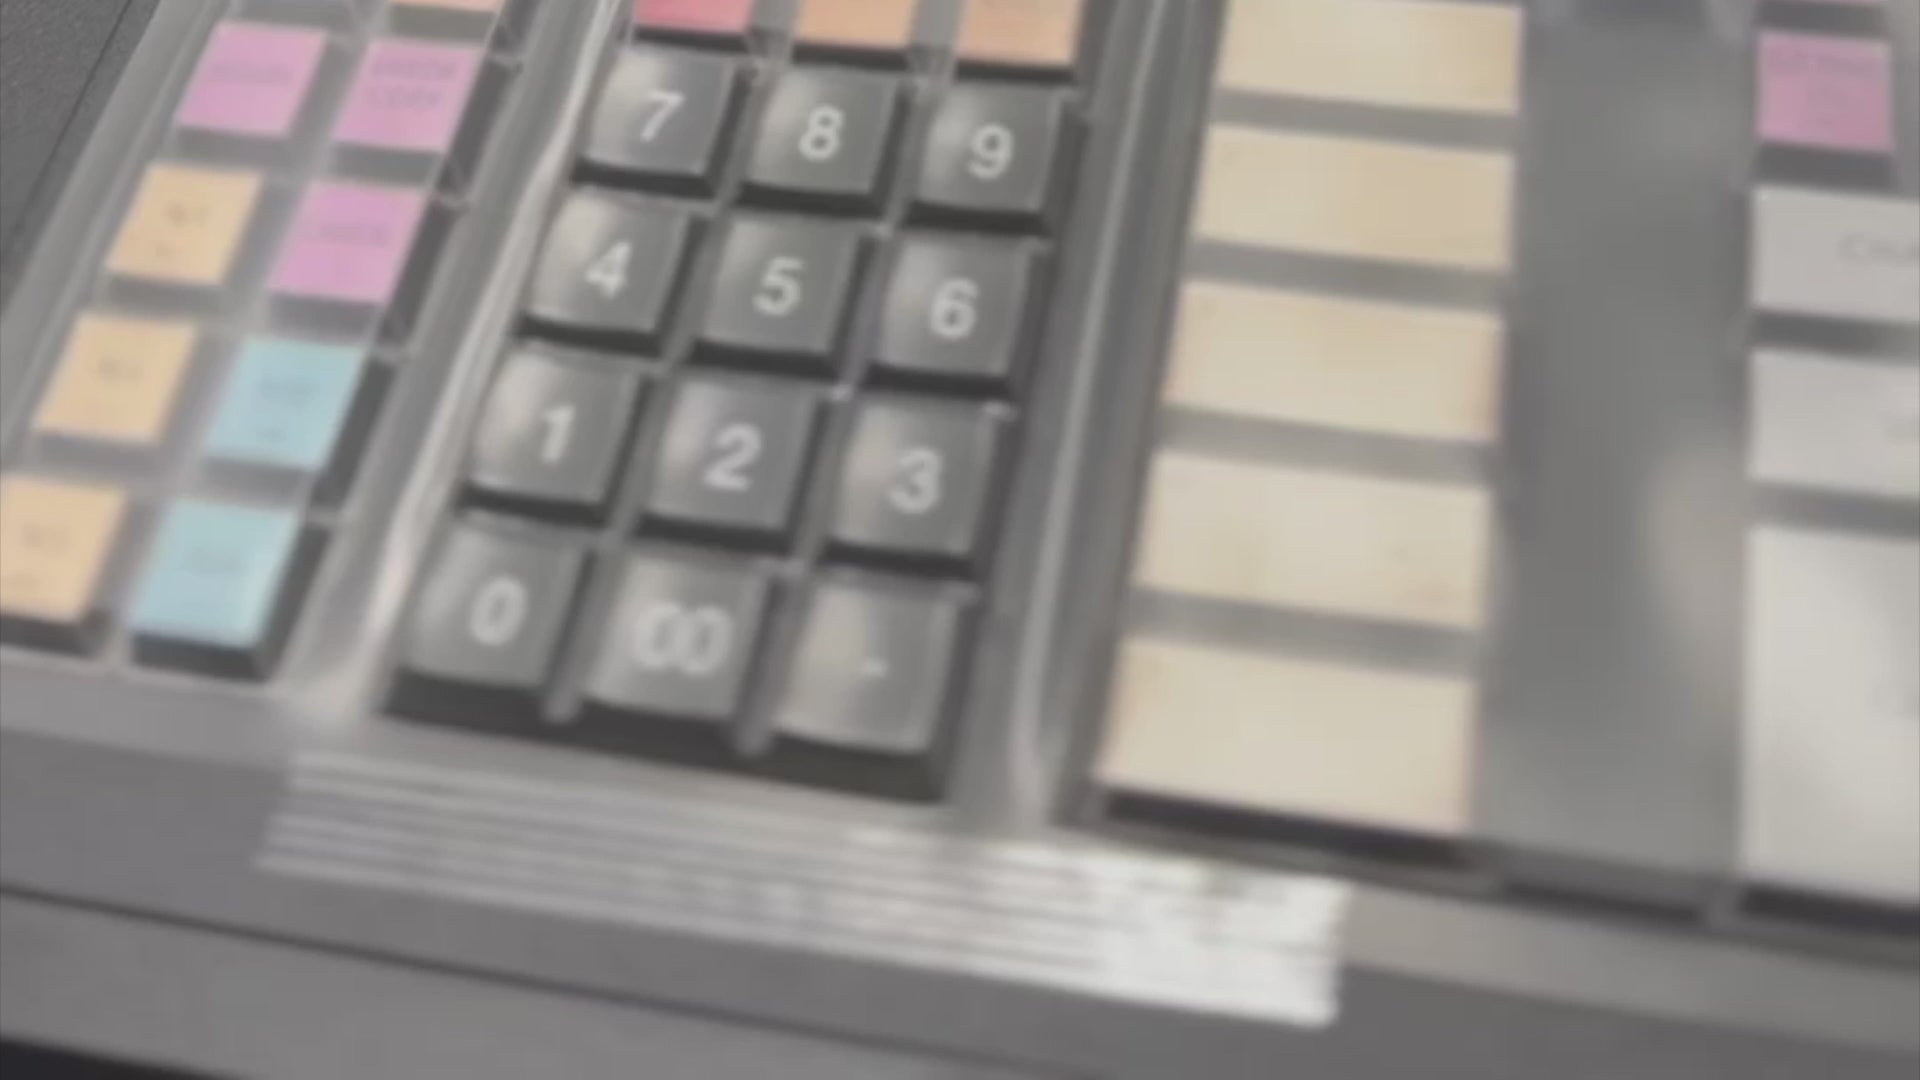 Load video: Transaction being made using a HK-7200 Series Cash Register